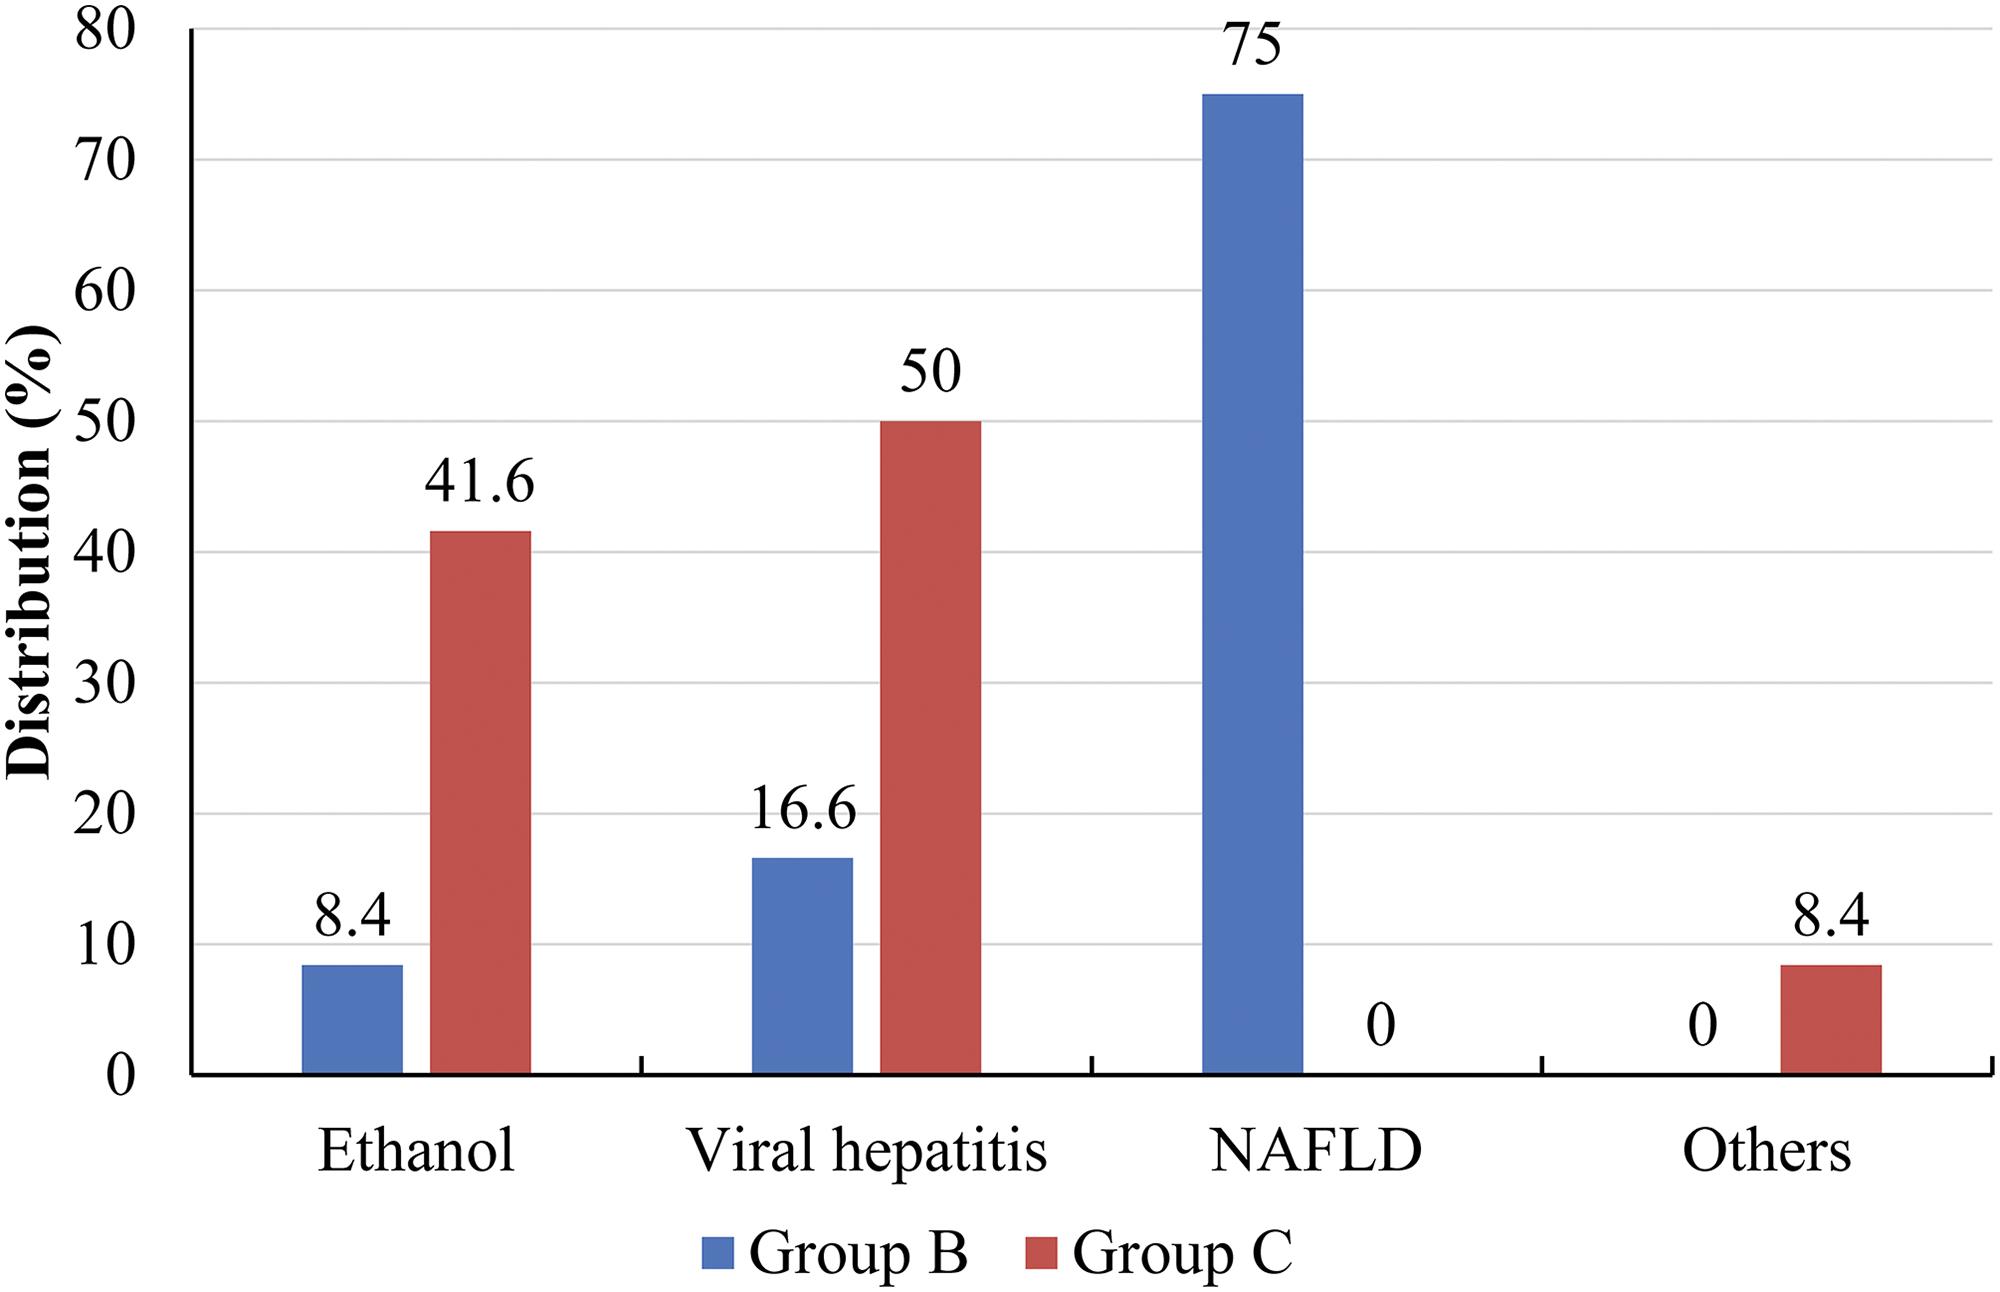 Etiologic distribution of chronic hepatitis and cirrhosis in Groups B and C (in%).